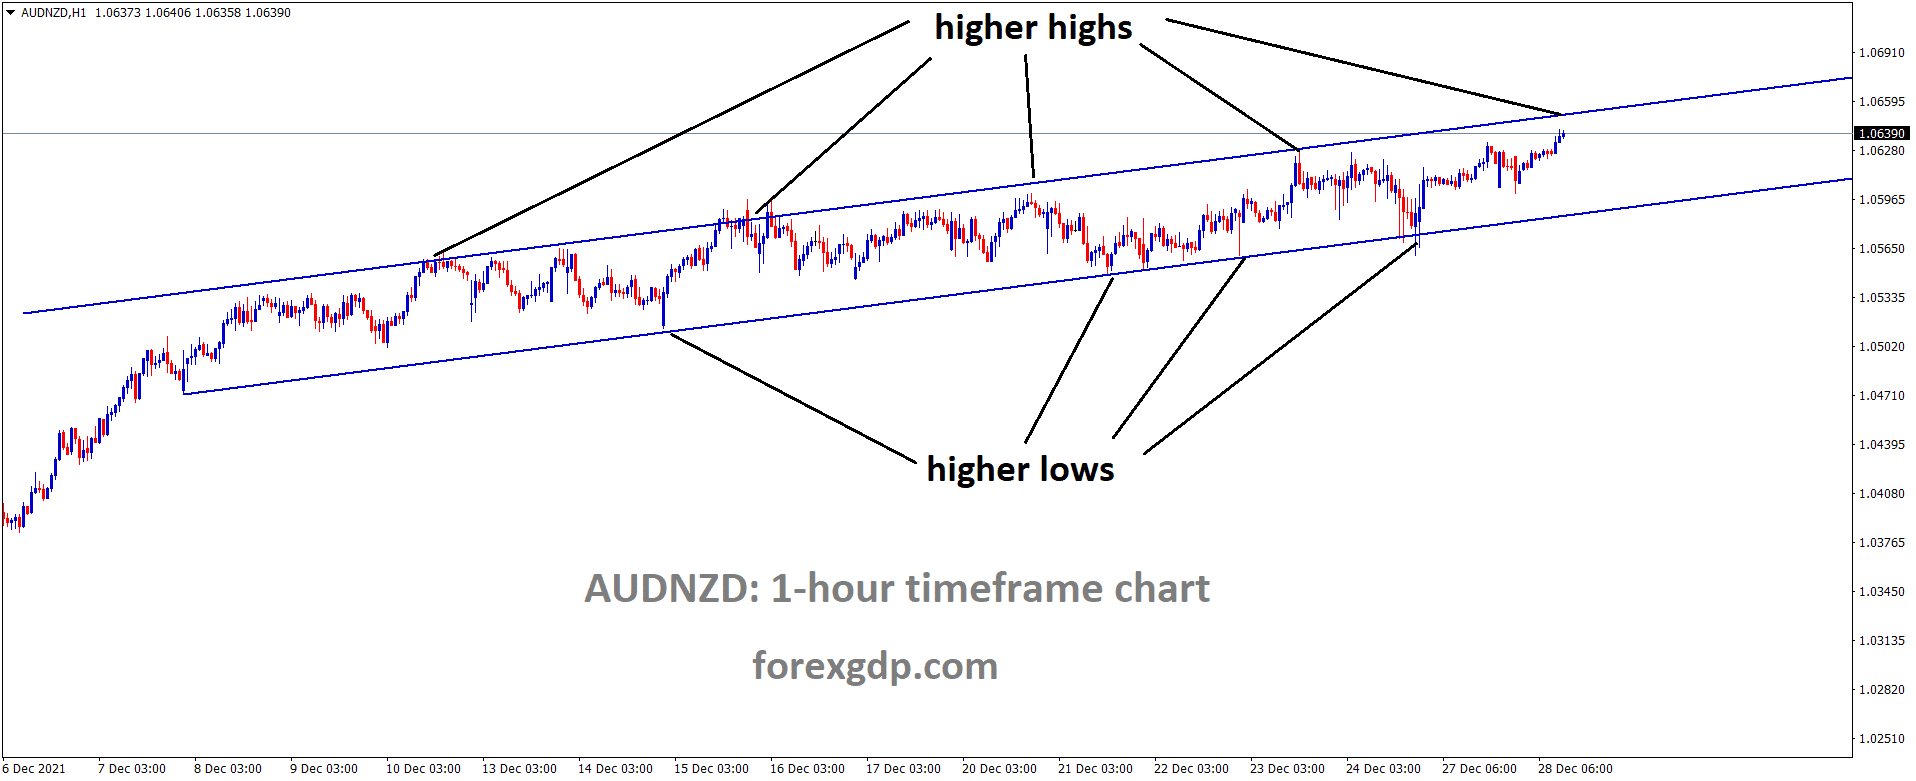 AUDNZD is moving in an Ascending channel and the market reached the higher high area of the channel 1